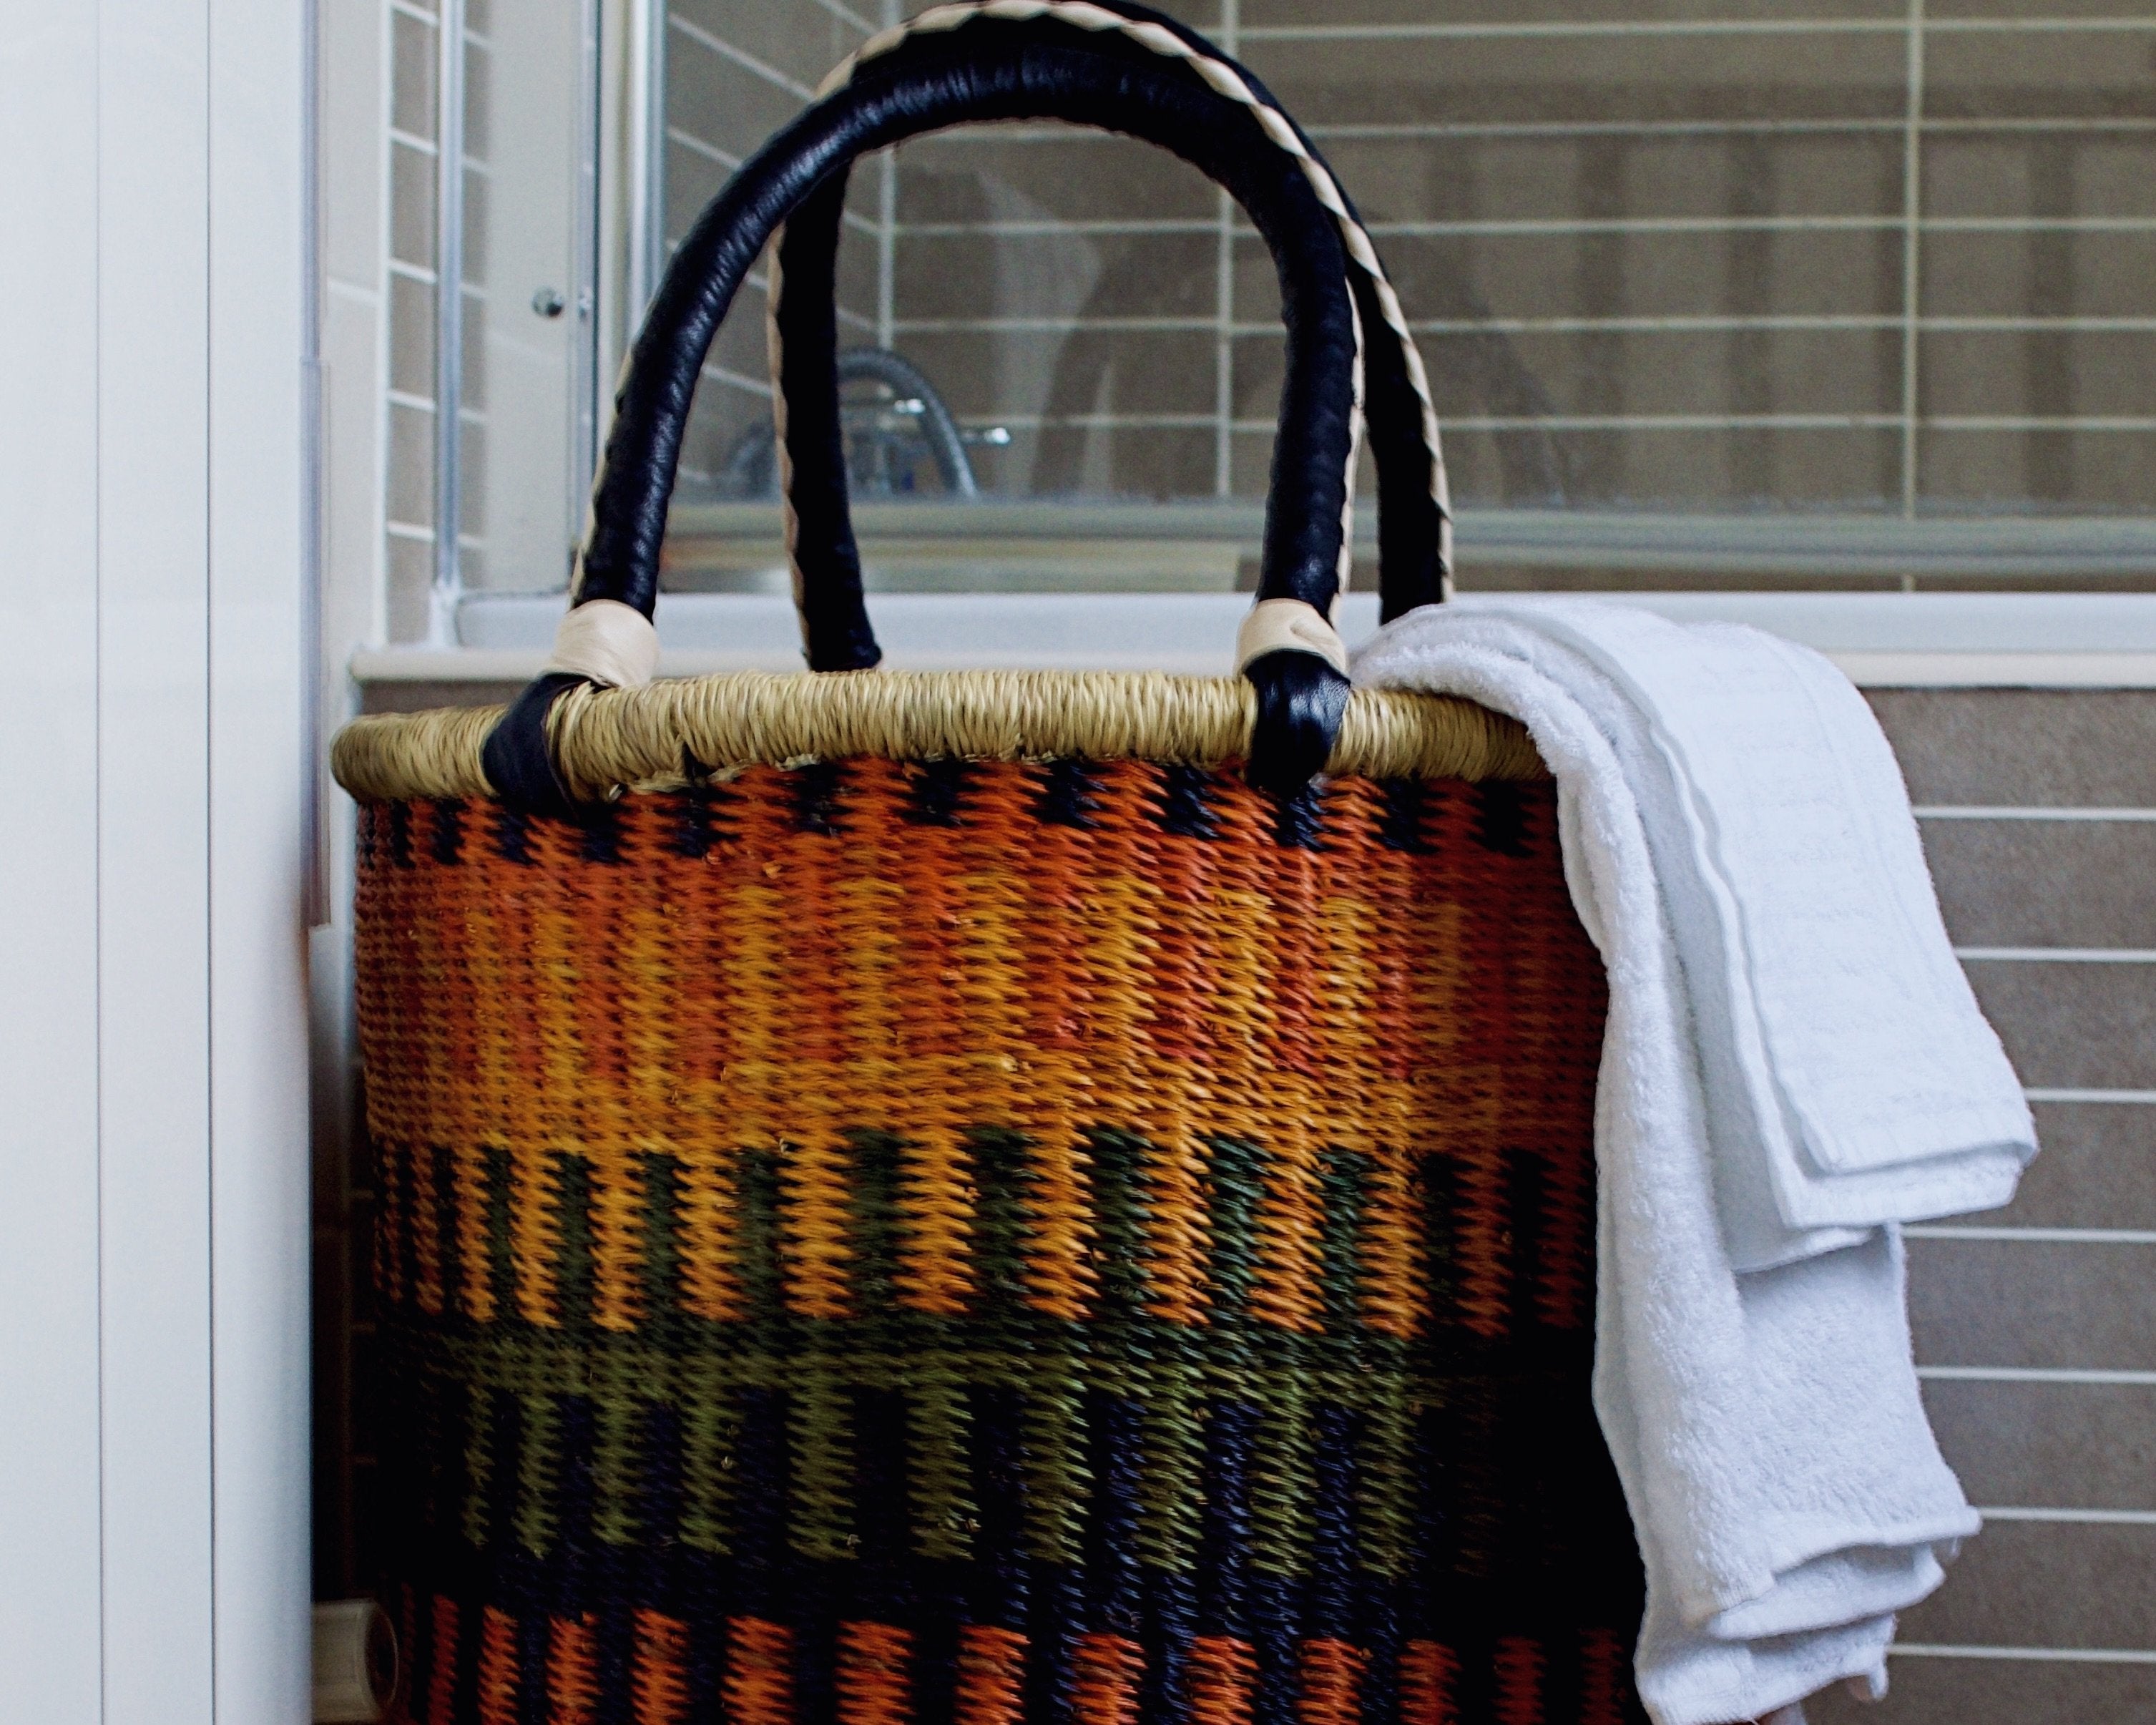 Colourful handwoven laundry basket placed in bathroom